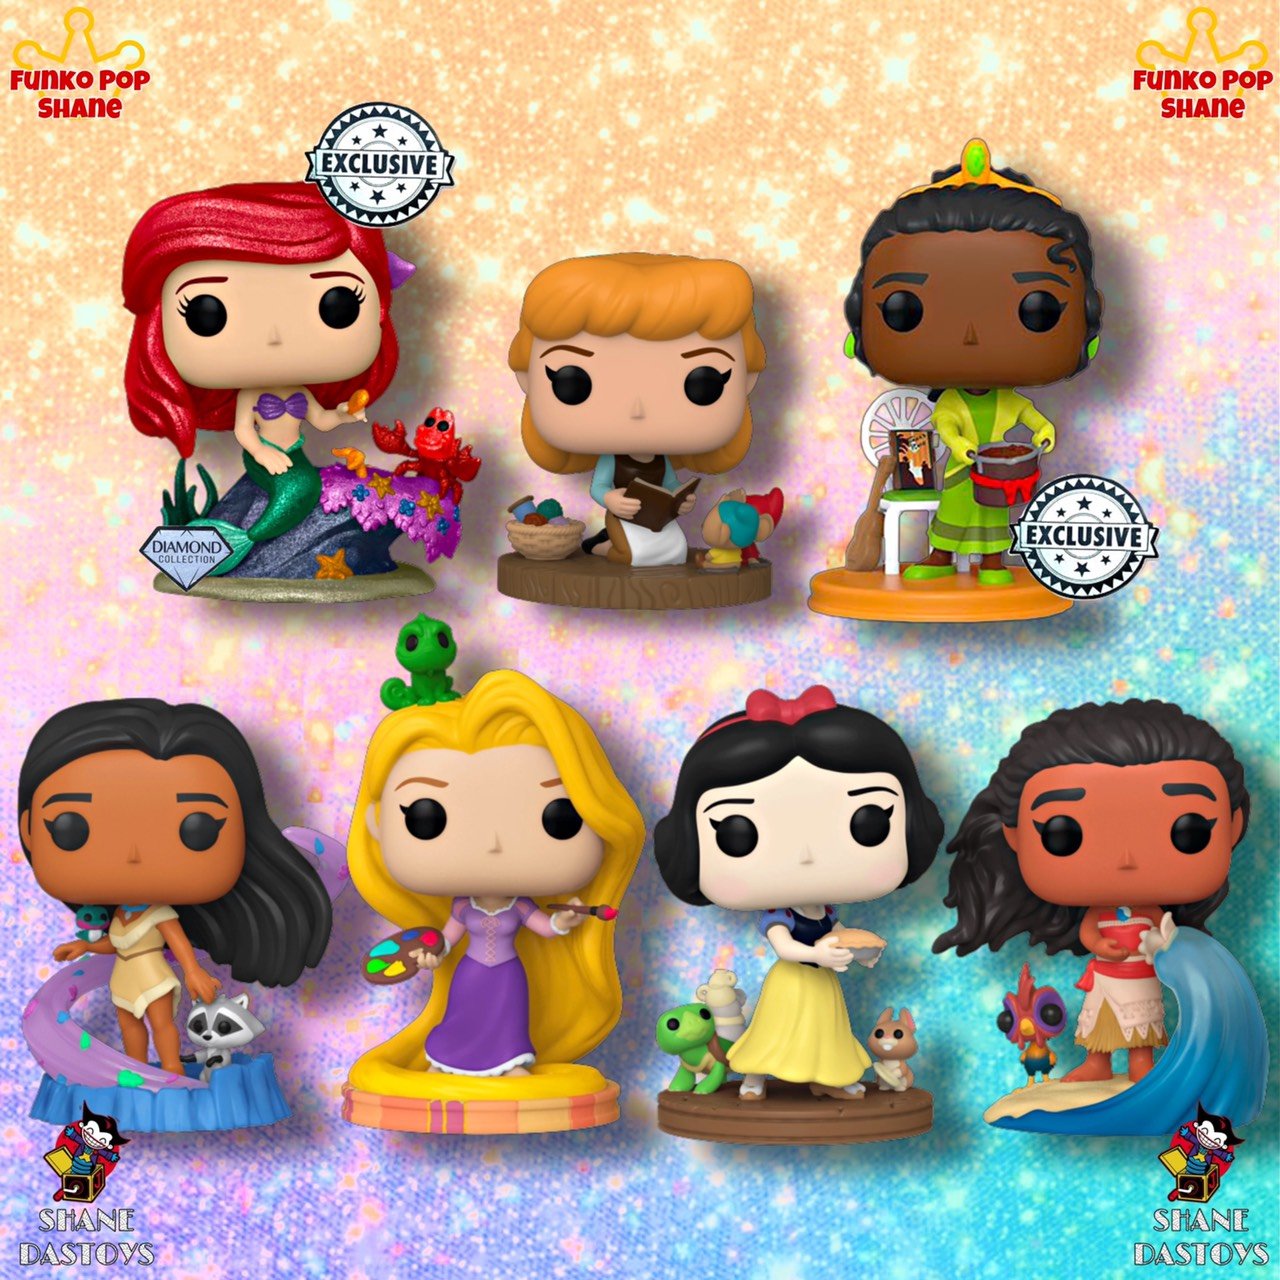 Disney Ultimate Princess Funko Pop Wave 2 Is Up for Pre-Order